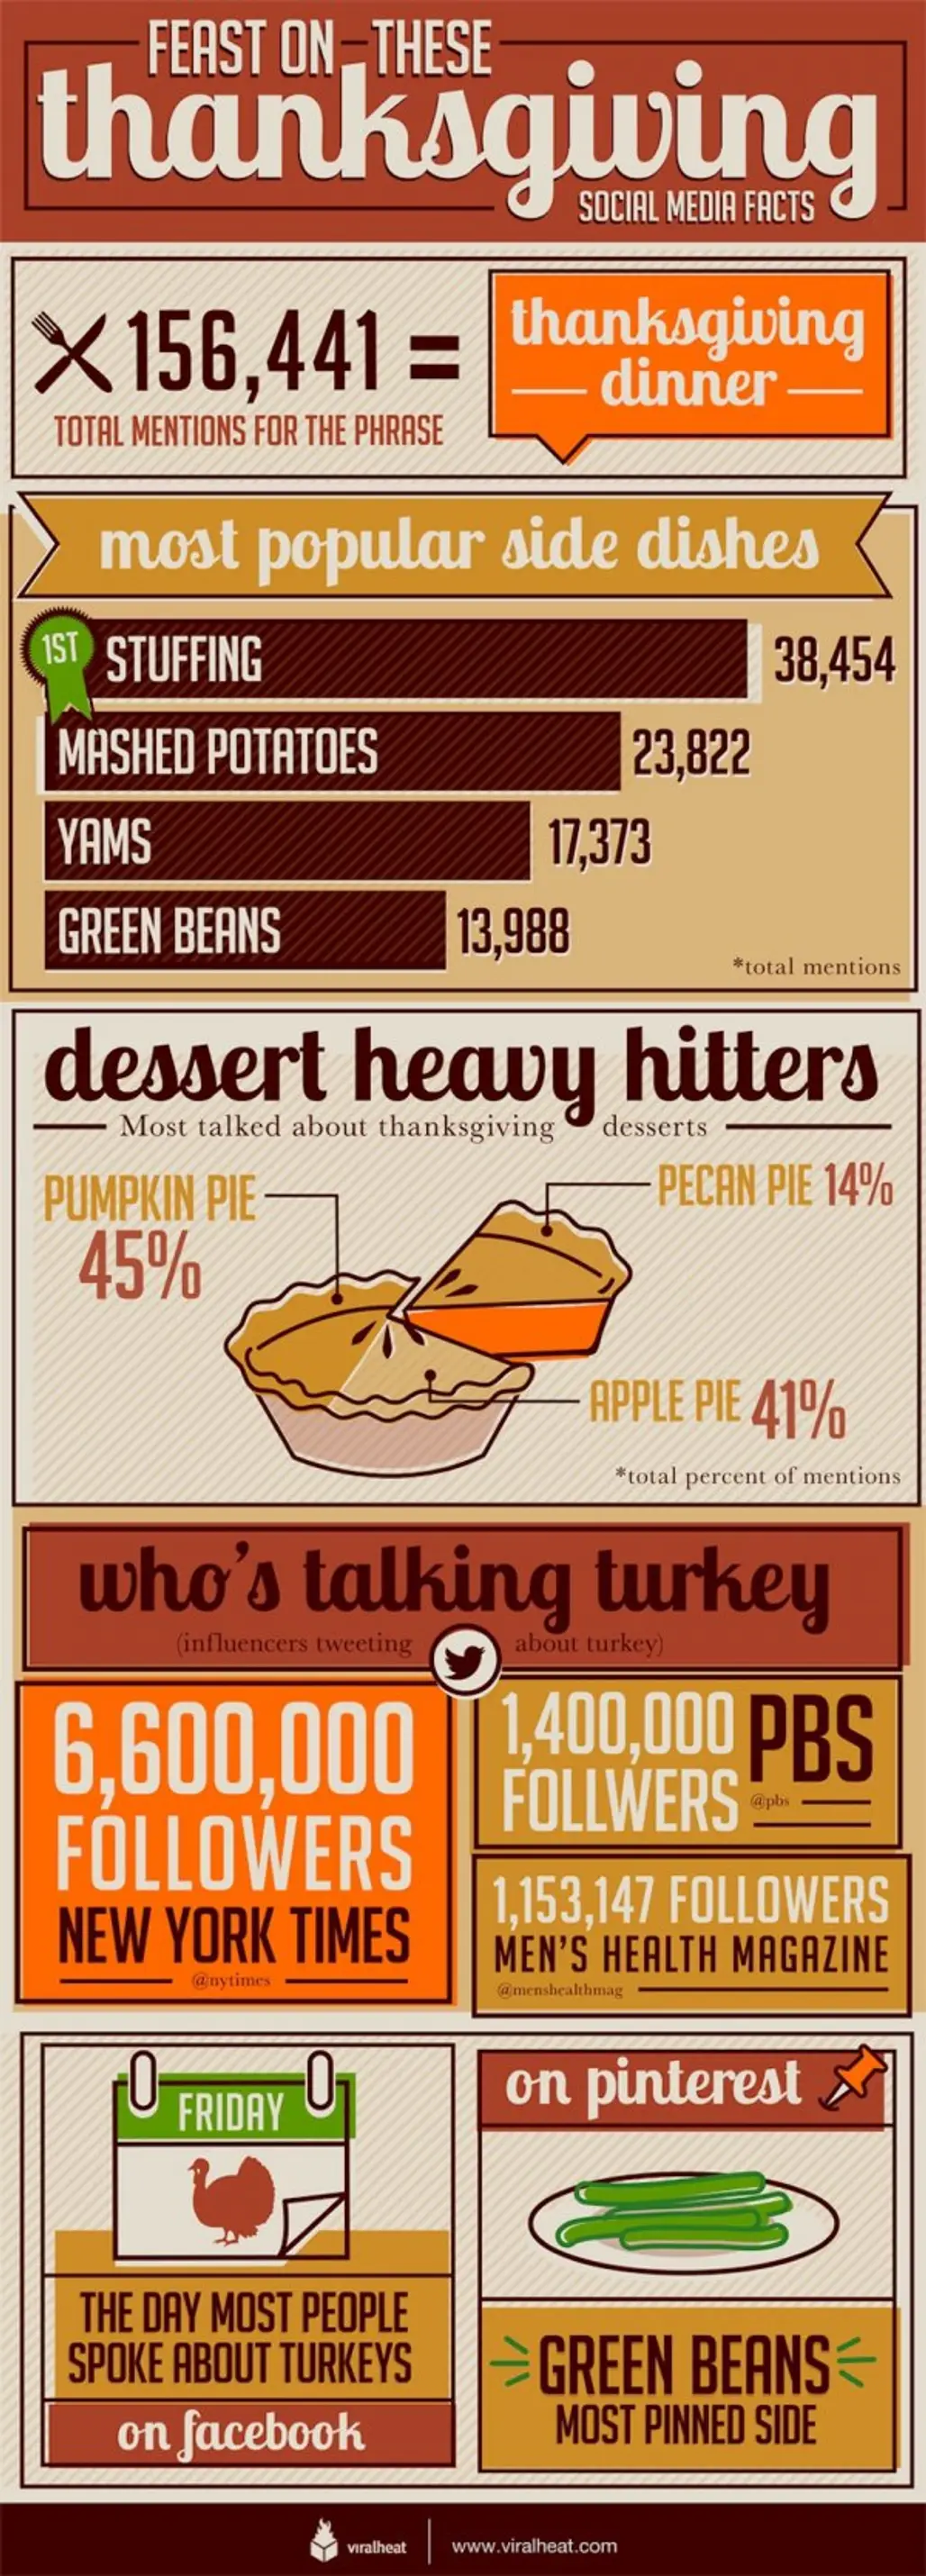 Feast on These Thanksgiving Social Media Facts